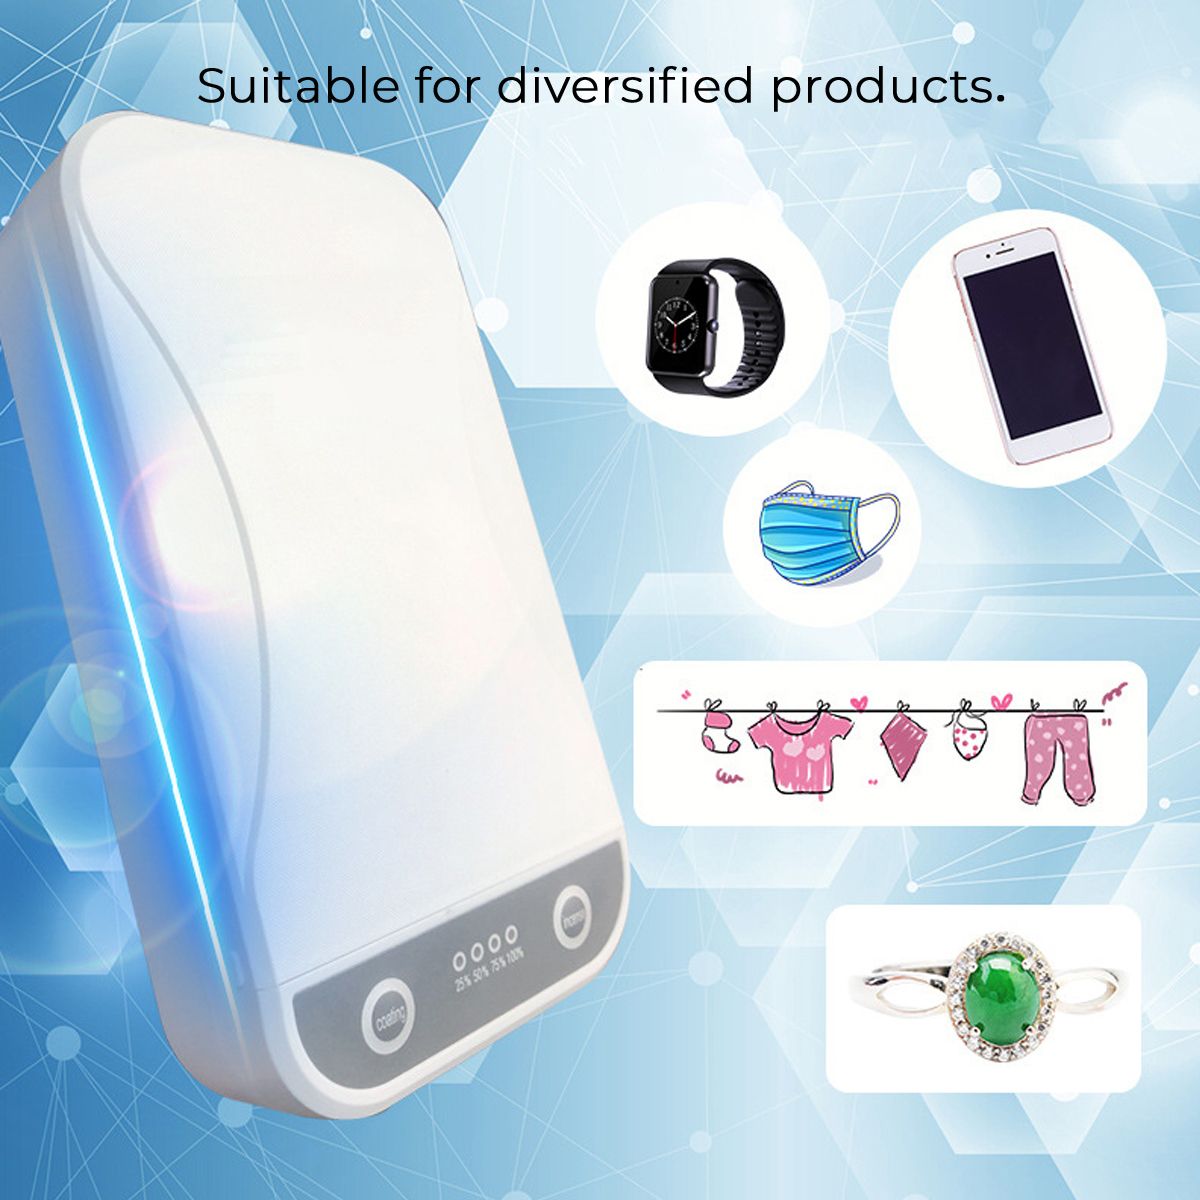 Multifunction-Double-UV-Phone-Watch-Disinfection-Sterilizer-Box-Face-Mask-Jewelry-Phones-Cleaner-wit-1658028